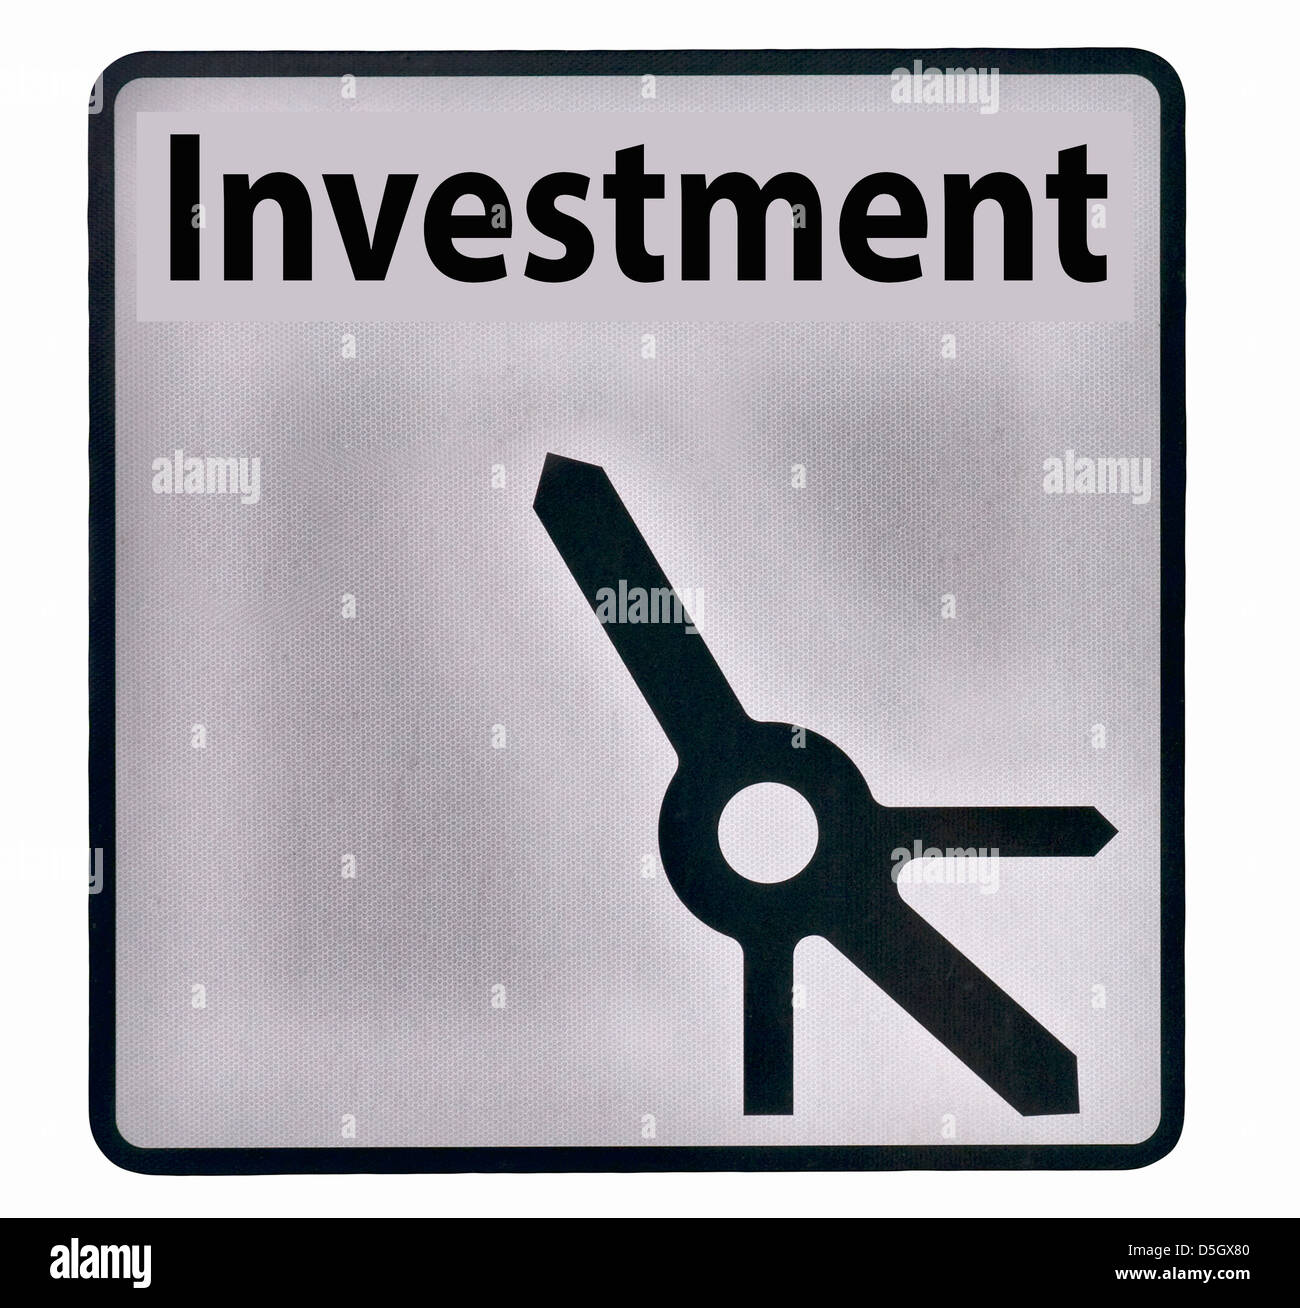 Investment on a road sign Stock Photo